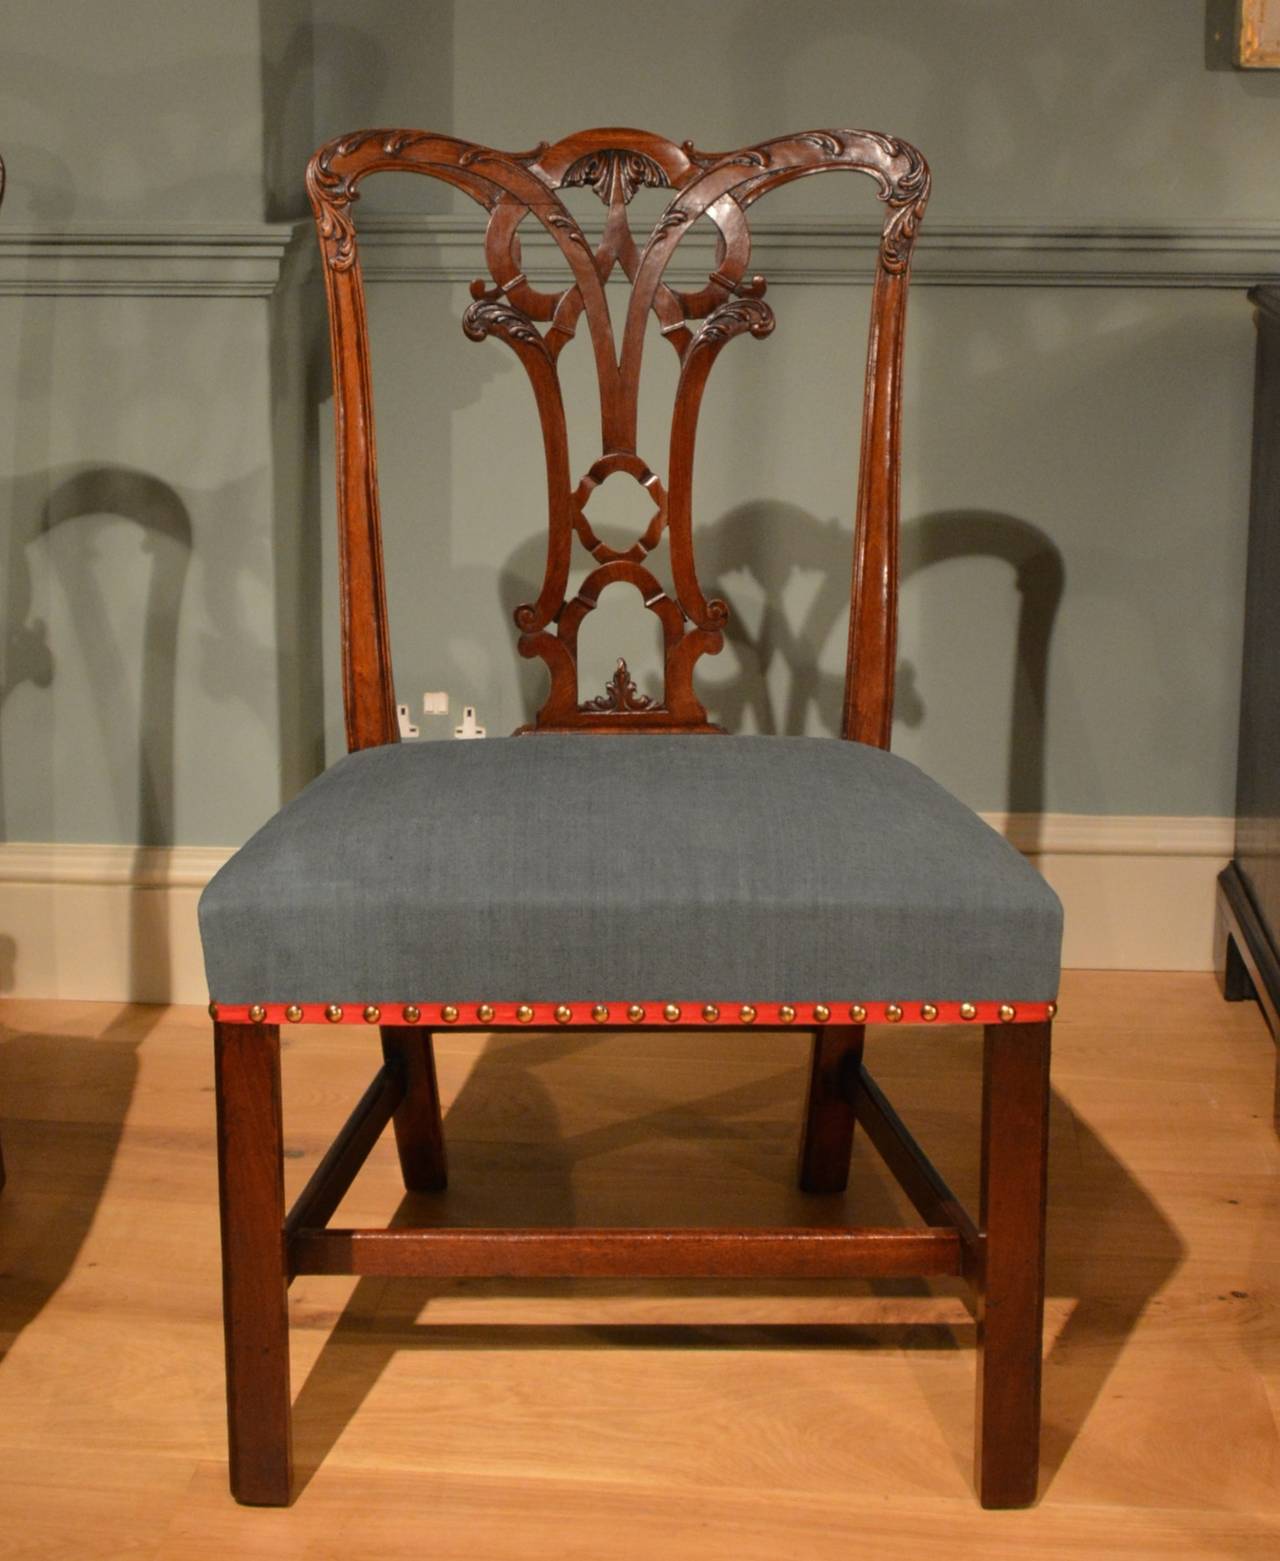 A fine set of ten Chippendale period mahogany dining chairs with well carved backs having interlaced splats, with stuff over seats standing on square legs with stretchers, English, circa 1760.